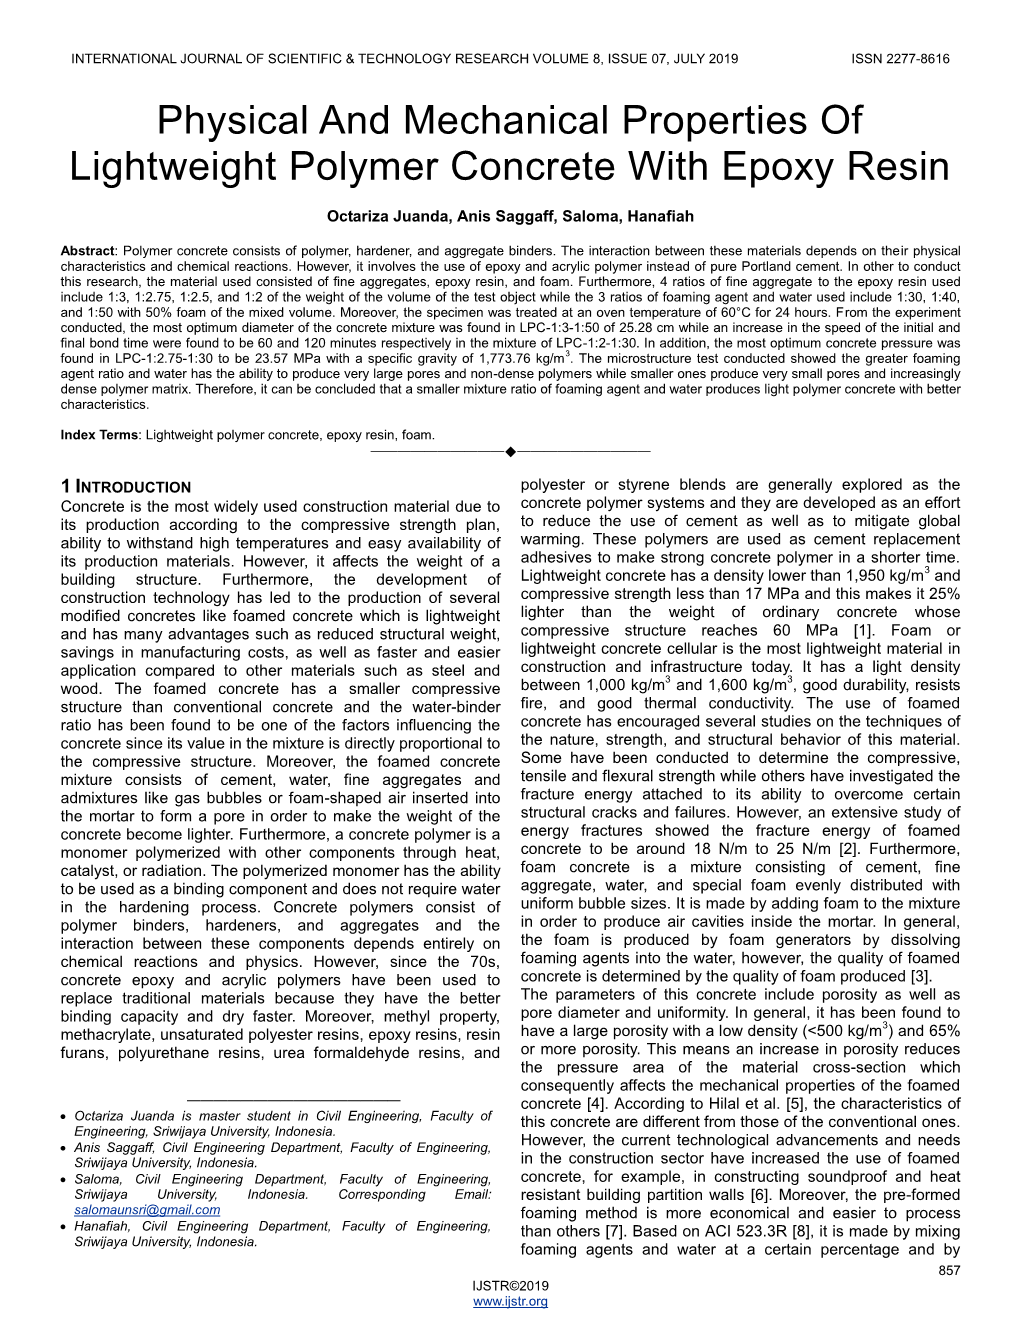 Physical and Mechanical Properties of Lightweight Polymer Concrete with Epoxy Resin